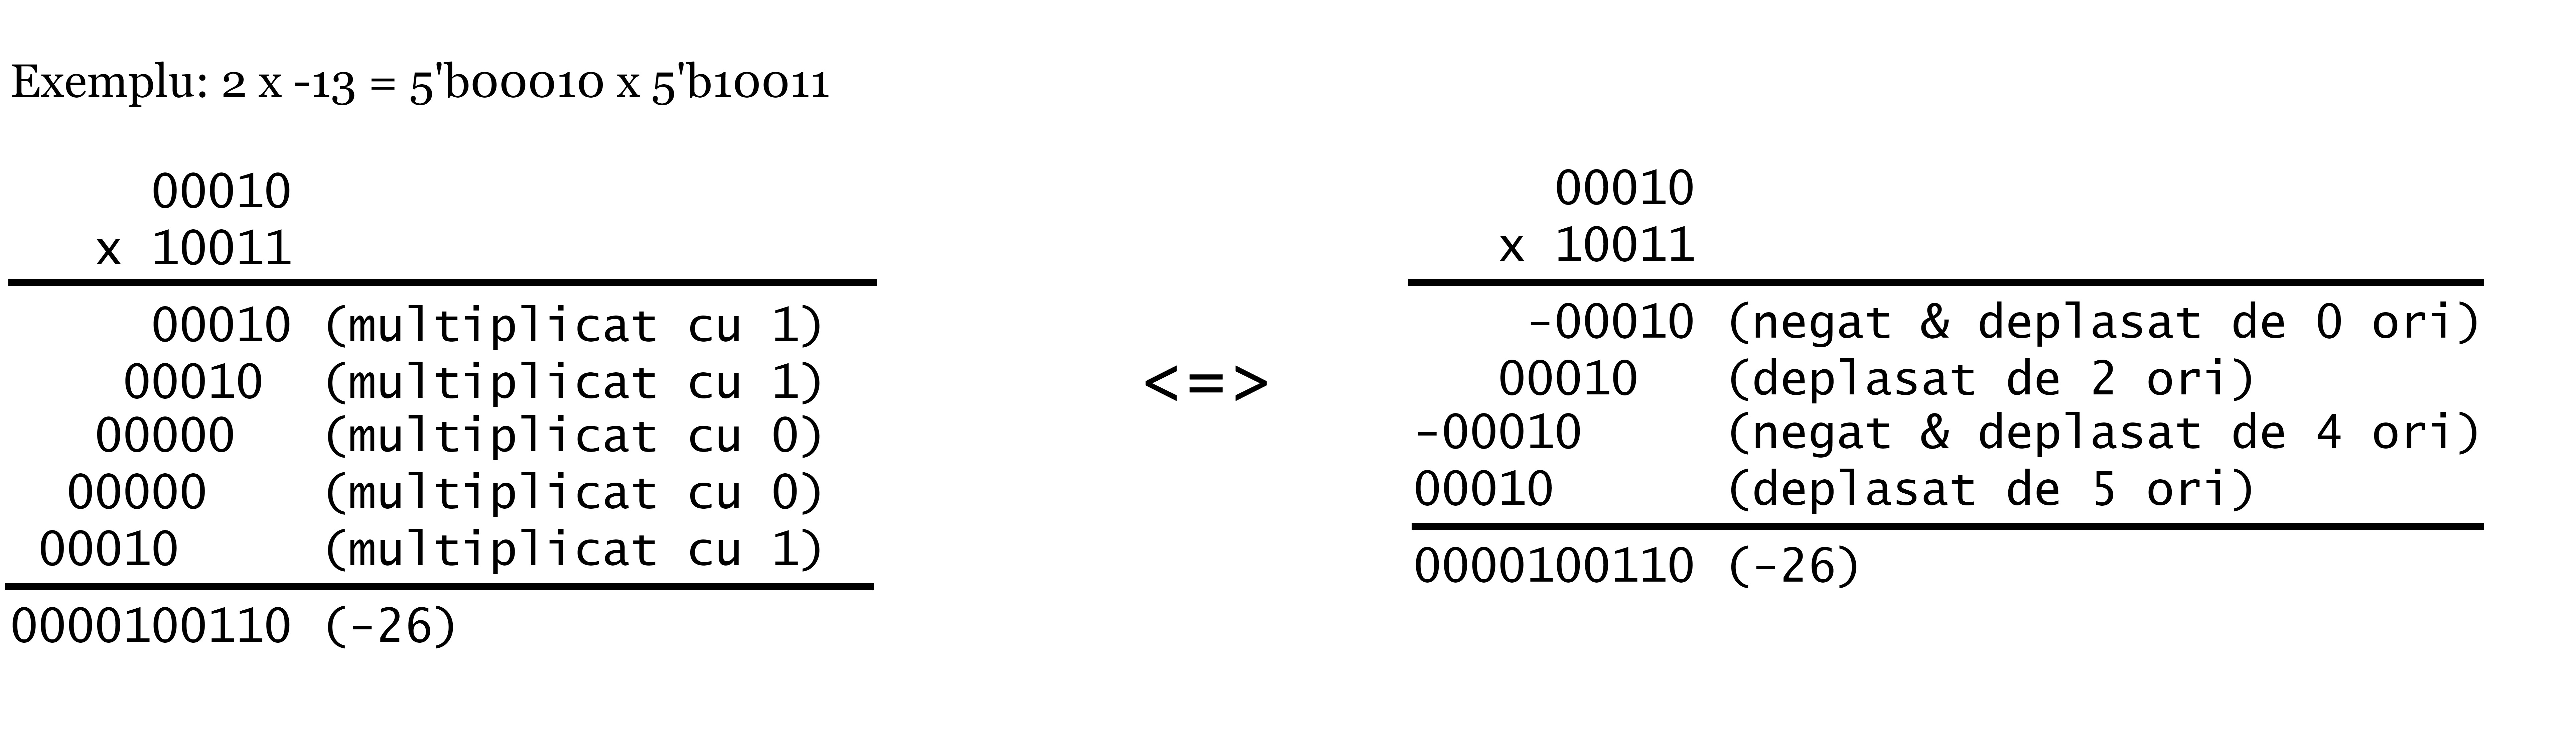 soc:laboratoare:08:booth_multiplication_example.png